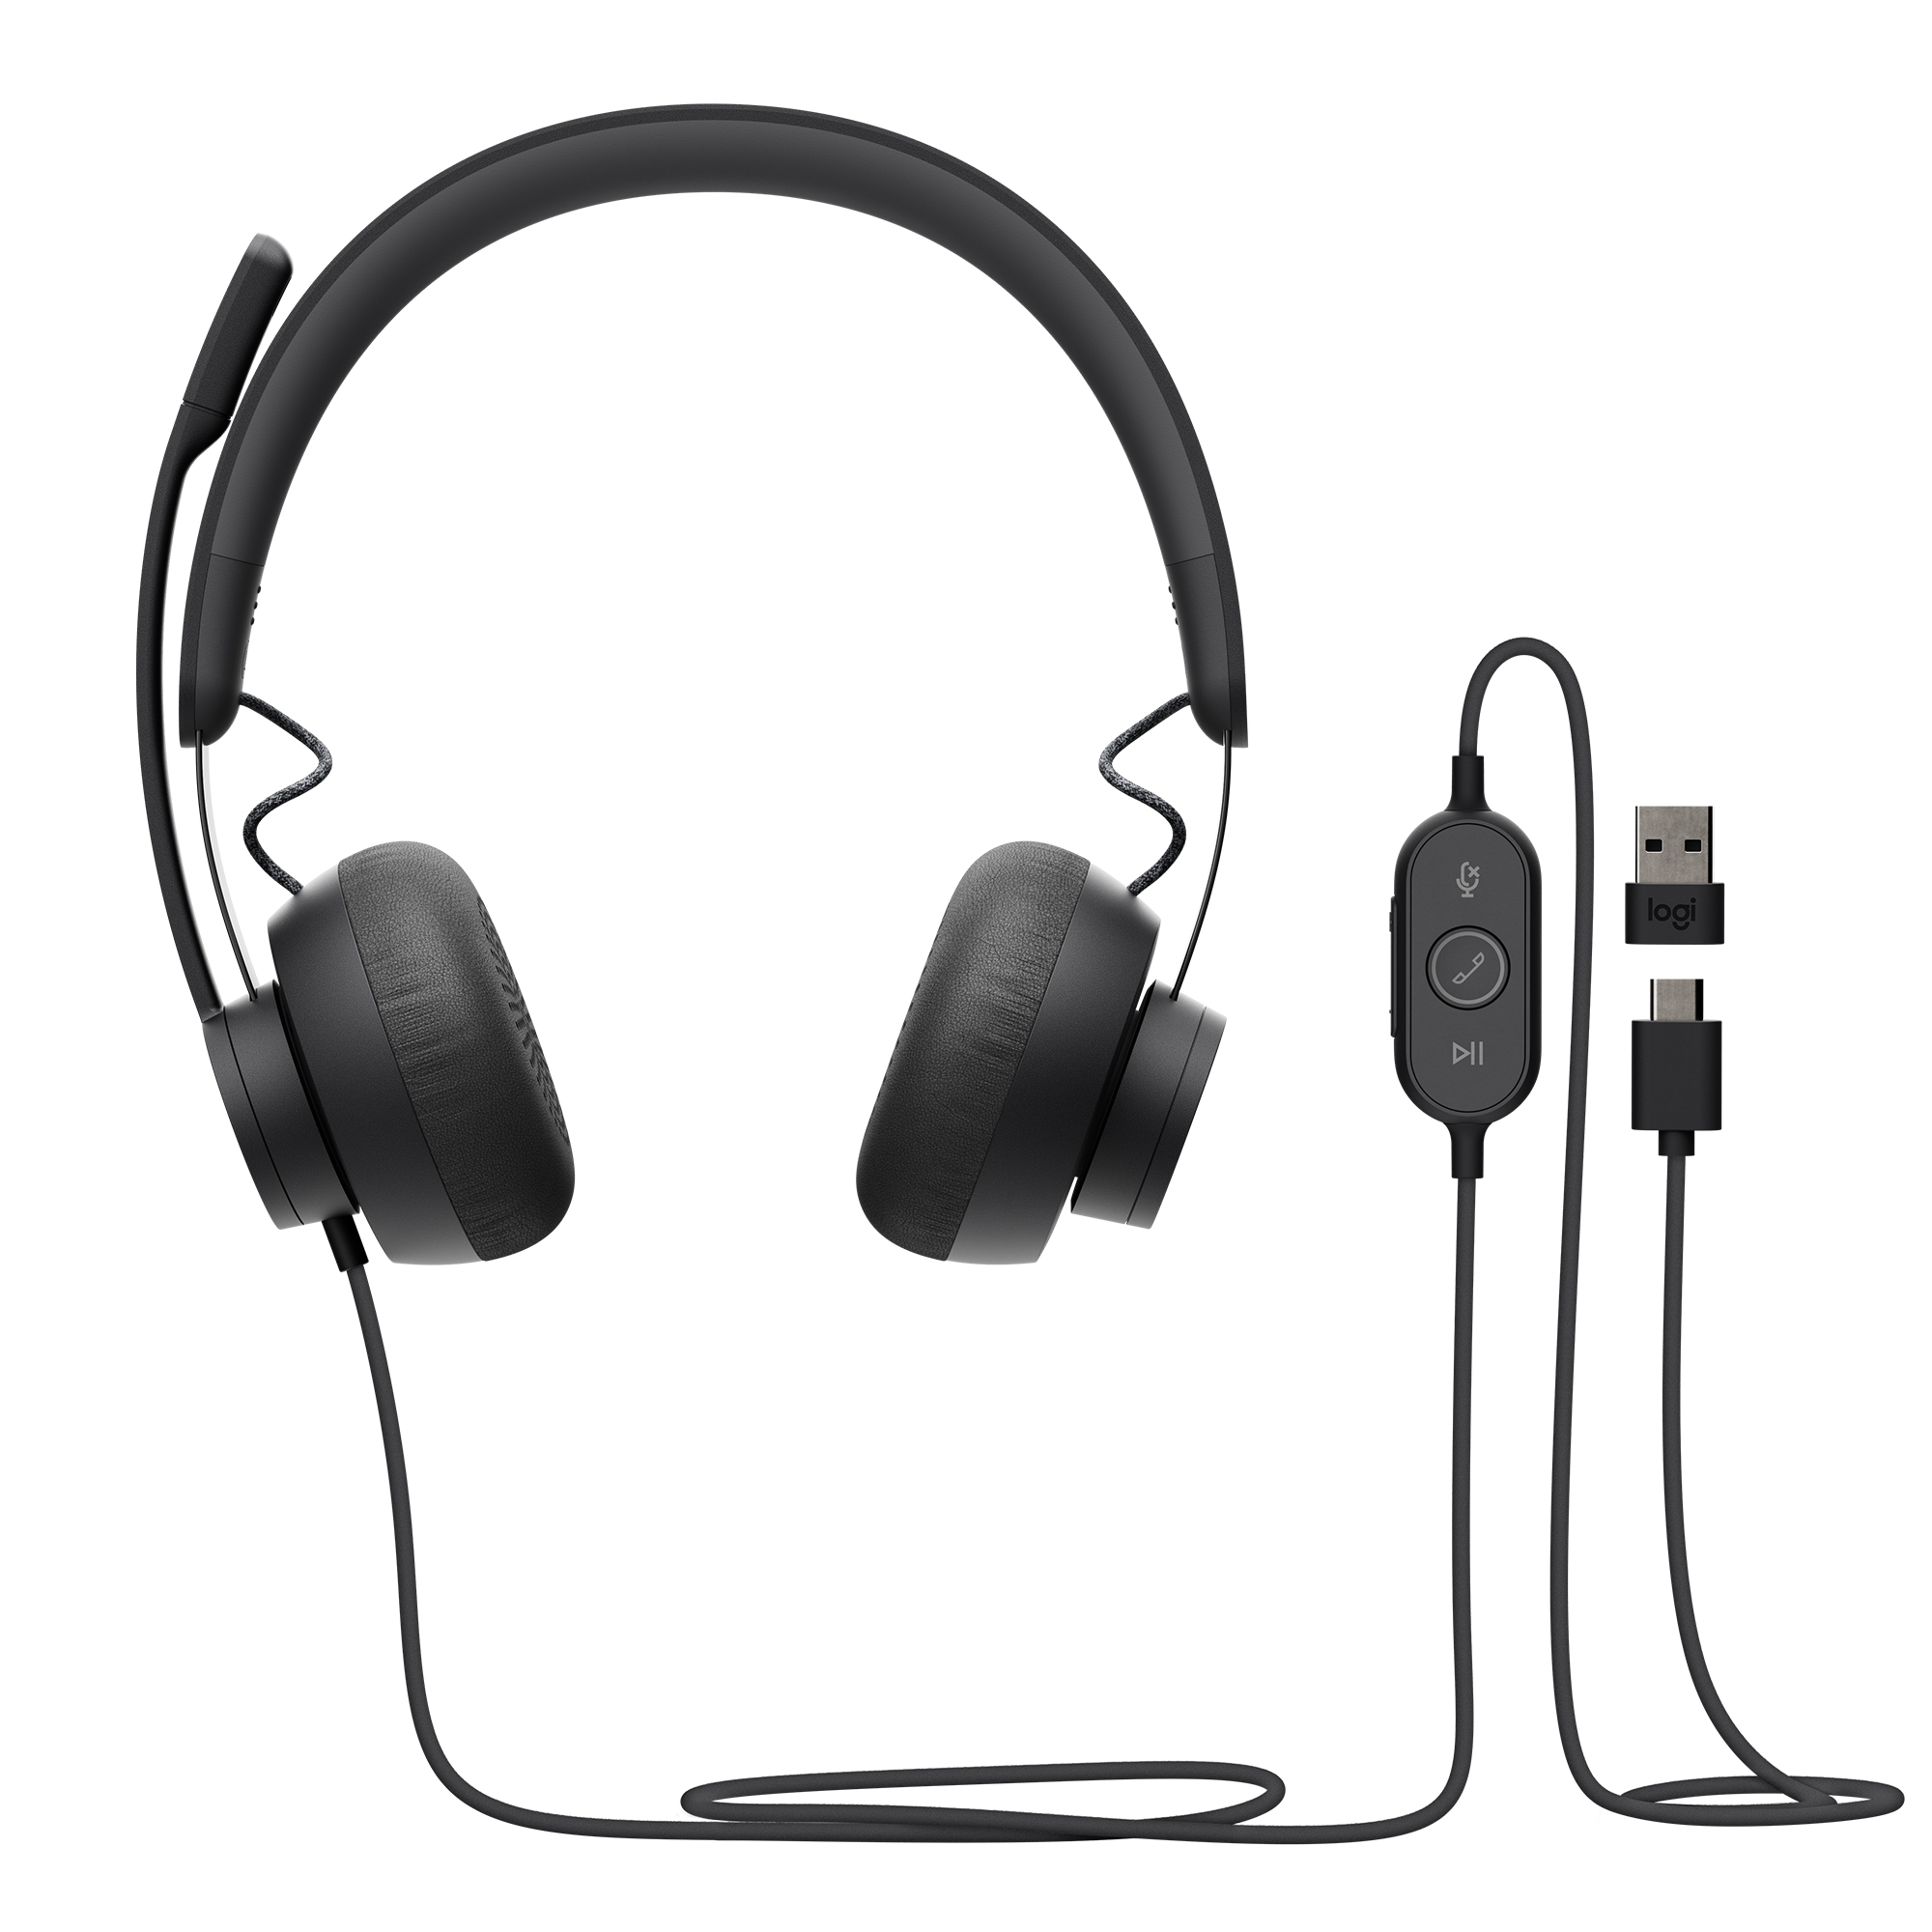 Angle View: Logitech - Zone 750 Wired Noise Canceling On-Ear Headset - Black